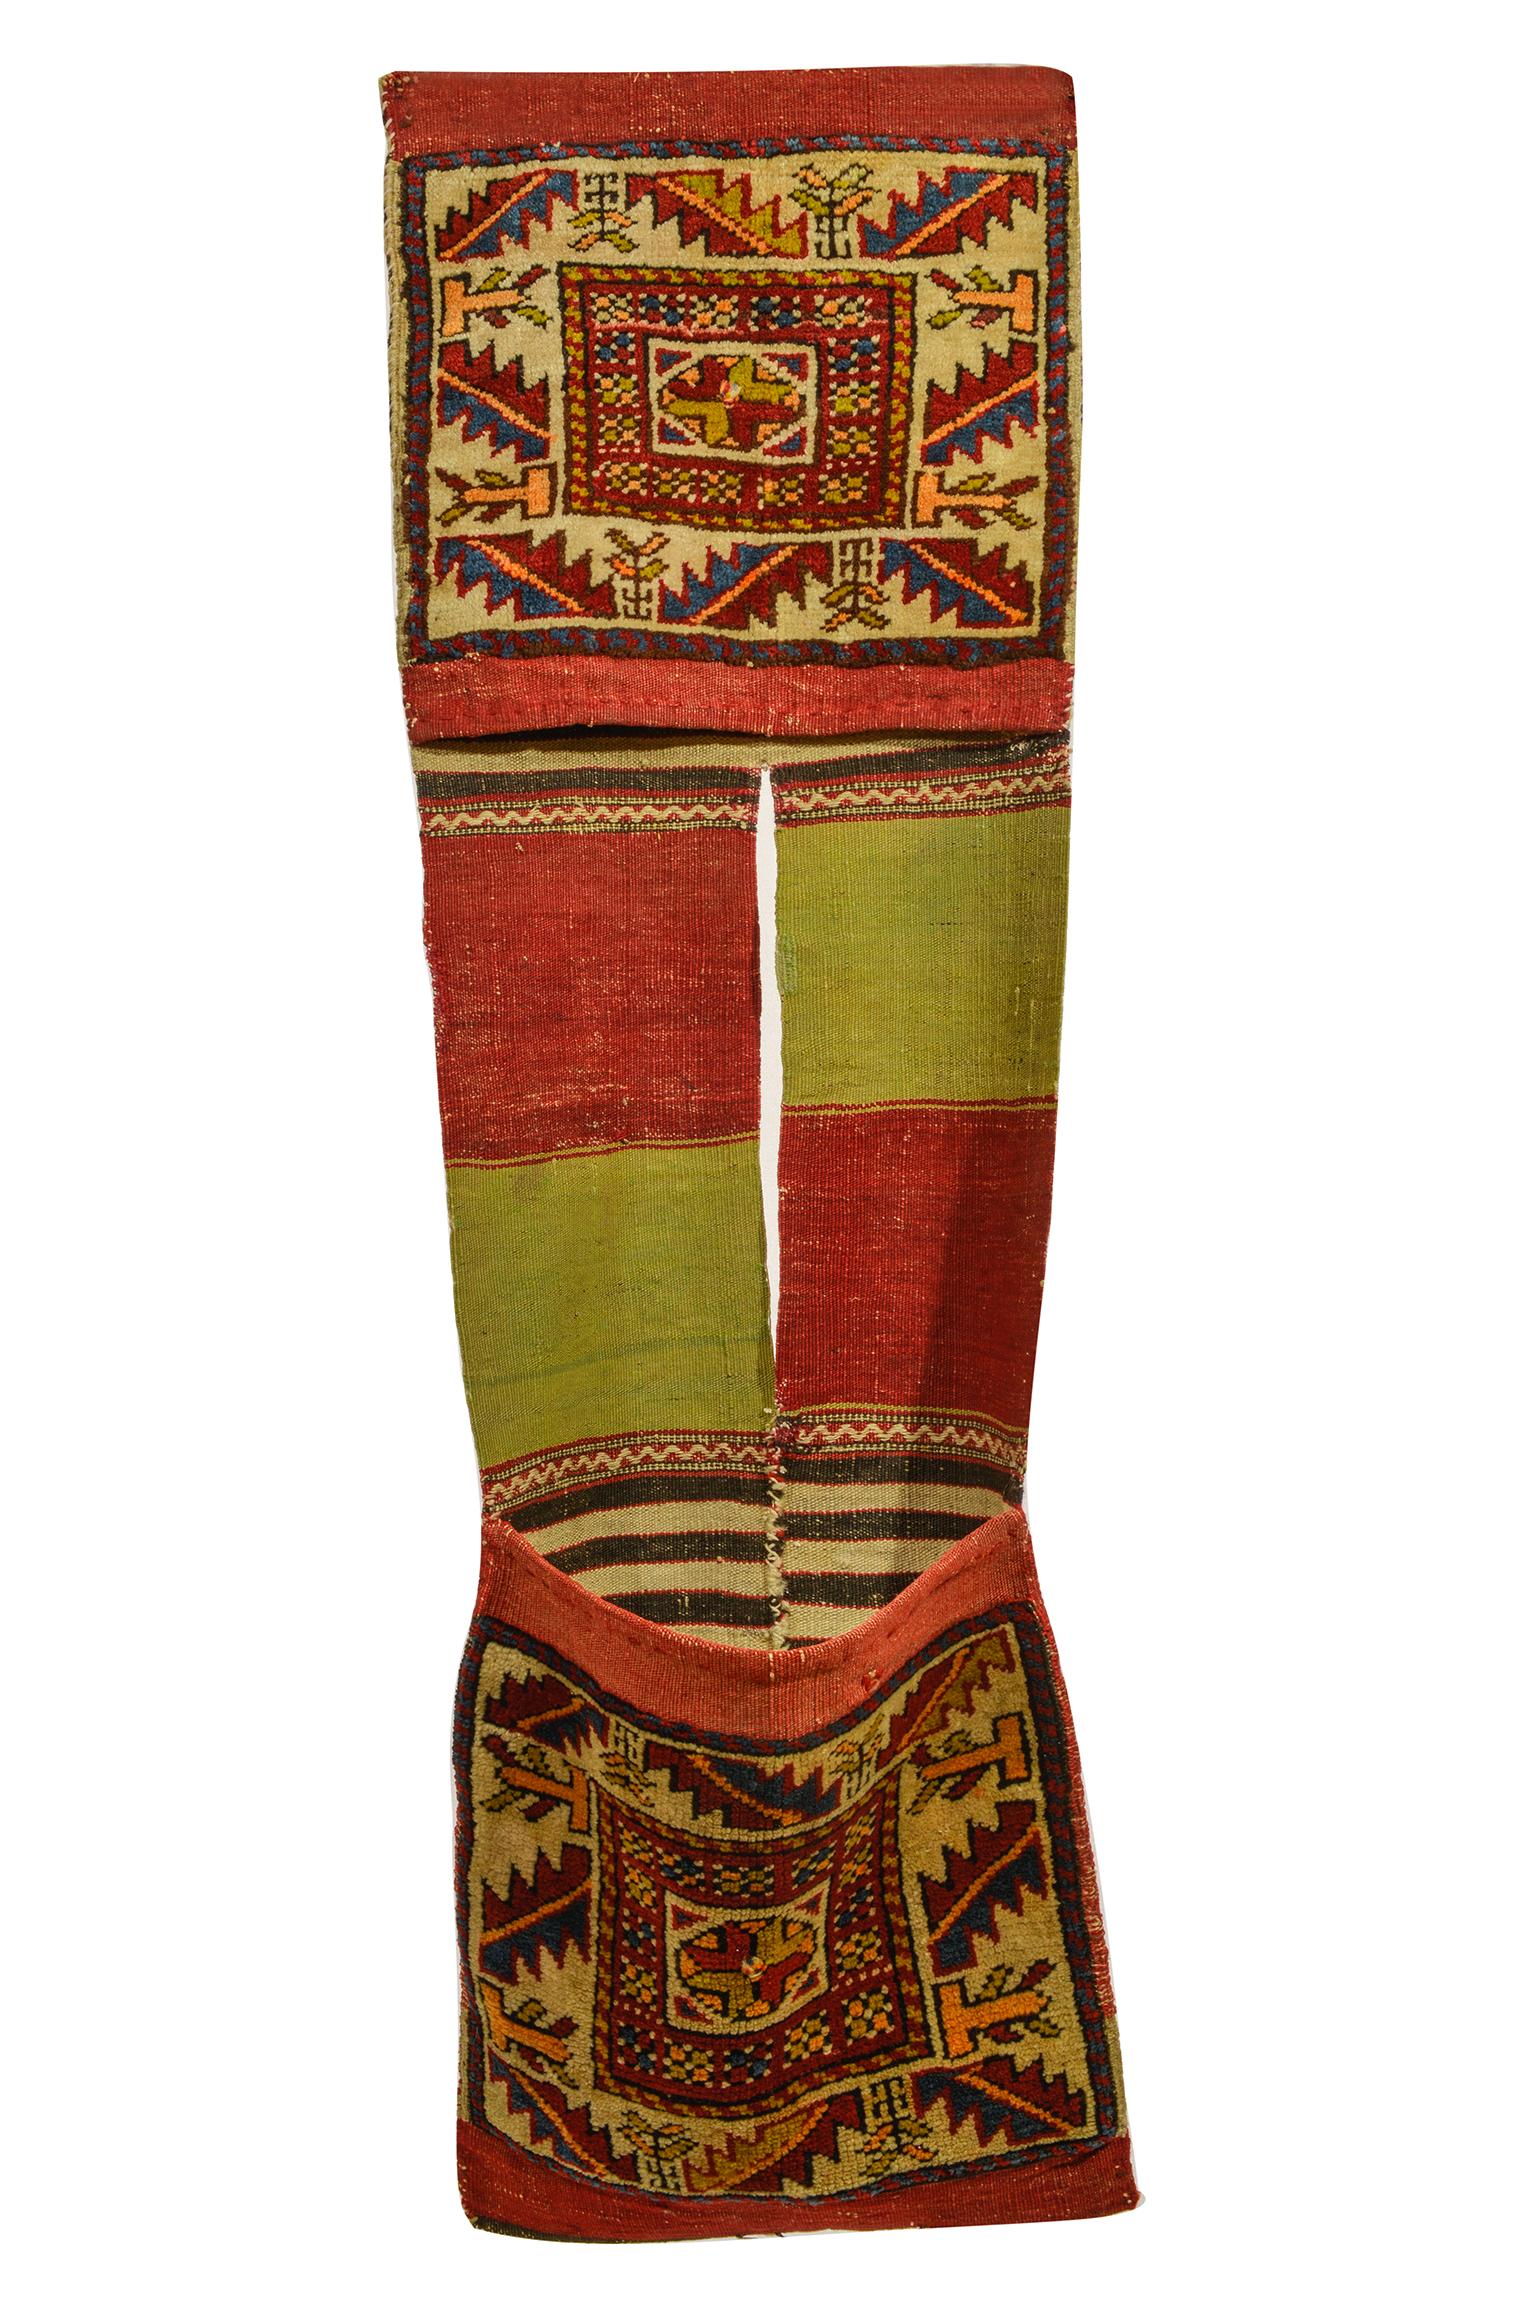 nr. 946 - Old Shahsavan saddle bag, with interesting design and beautiful colors: border with leaves and little trees, central part Kilim with alternating colors red and pea green.
Suitable on wall (horizontal)  like a painting or on a LITTLE  BENCH